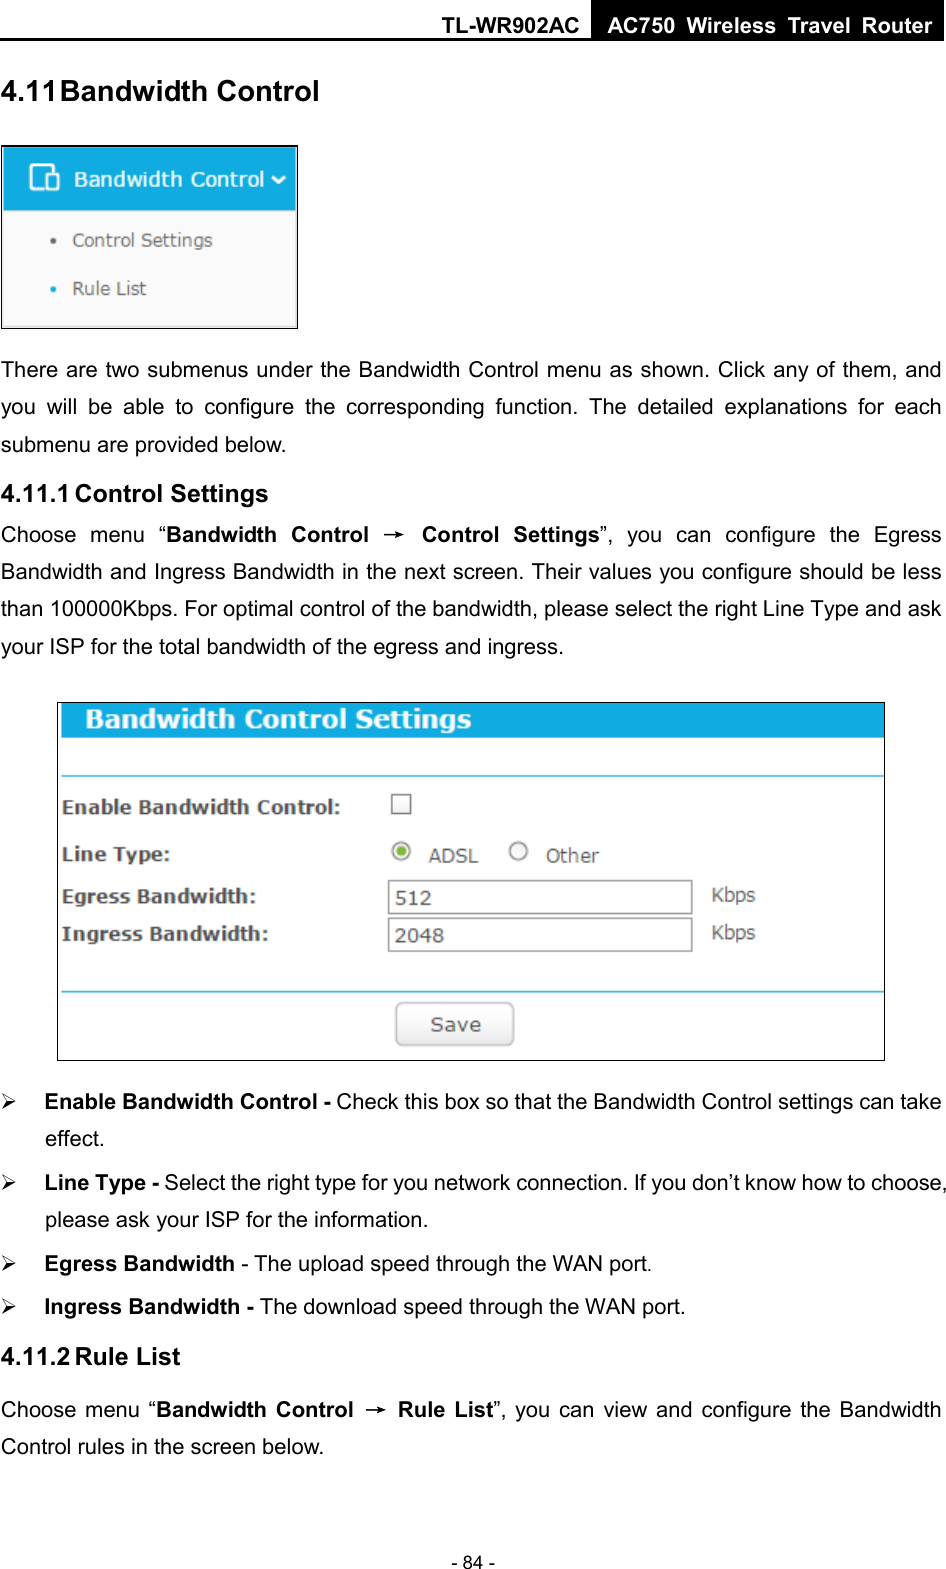 TL-WR902AC AC750  Wireless Travel Router  - 84 - 4.11 Bandwidth Control  There are two submenus under the Bandwidth Control menu as shown. Click any of them, and you will be able to configure the corresponding function. The detailed explanations for each submenu are provided below. 4.11.1 Control Settings Choose menu “Bandwidth Control → Control Settings”, you can configure the Egress Bandwidth and Ingress Bandwidth in the next screen. Their values you configure should be less than 100000Kbps. For optimal control of the bandwidth, please select the right Line Type and ask your ISP for the total bandwidth of the egress and ingress.   Enable Bandwidth Control - Check this box so that the Bandwidth Control settings can take effect.  Line Type - Select the right type for you network connection. If you don’t know how to choose, please ask your ISP for the information.  Egress Bandwidth - The upload speed through the WAN port.  Ingress Bandwidth - The download speed through the WAN port. 4.11.2 Rule List Choose menu “Bandwidth Control → Rule List”, you can view and configure the Bandwidth Control rules in the screen below. 